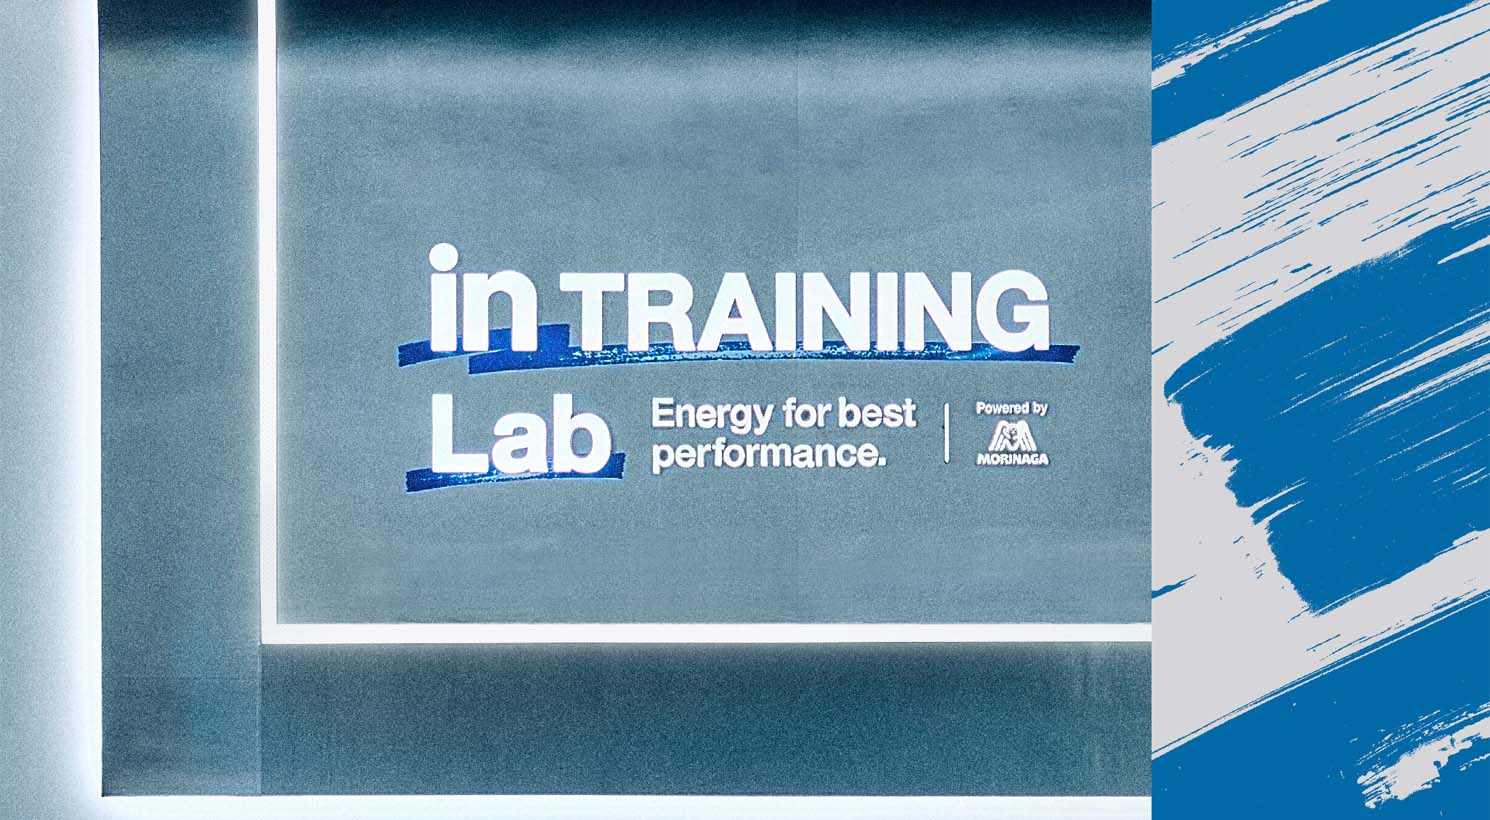 inTRAINING Lab Energy for best performance.